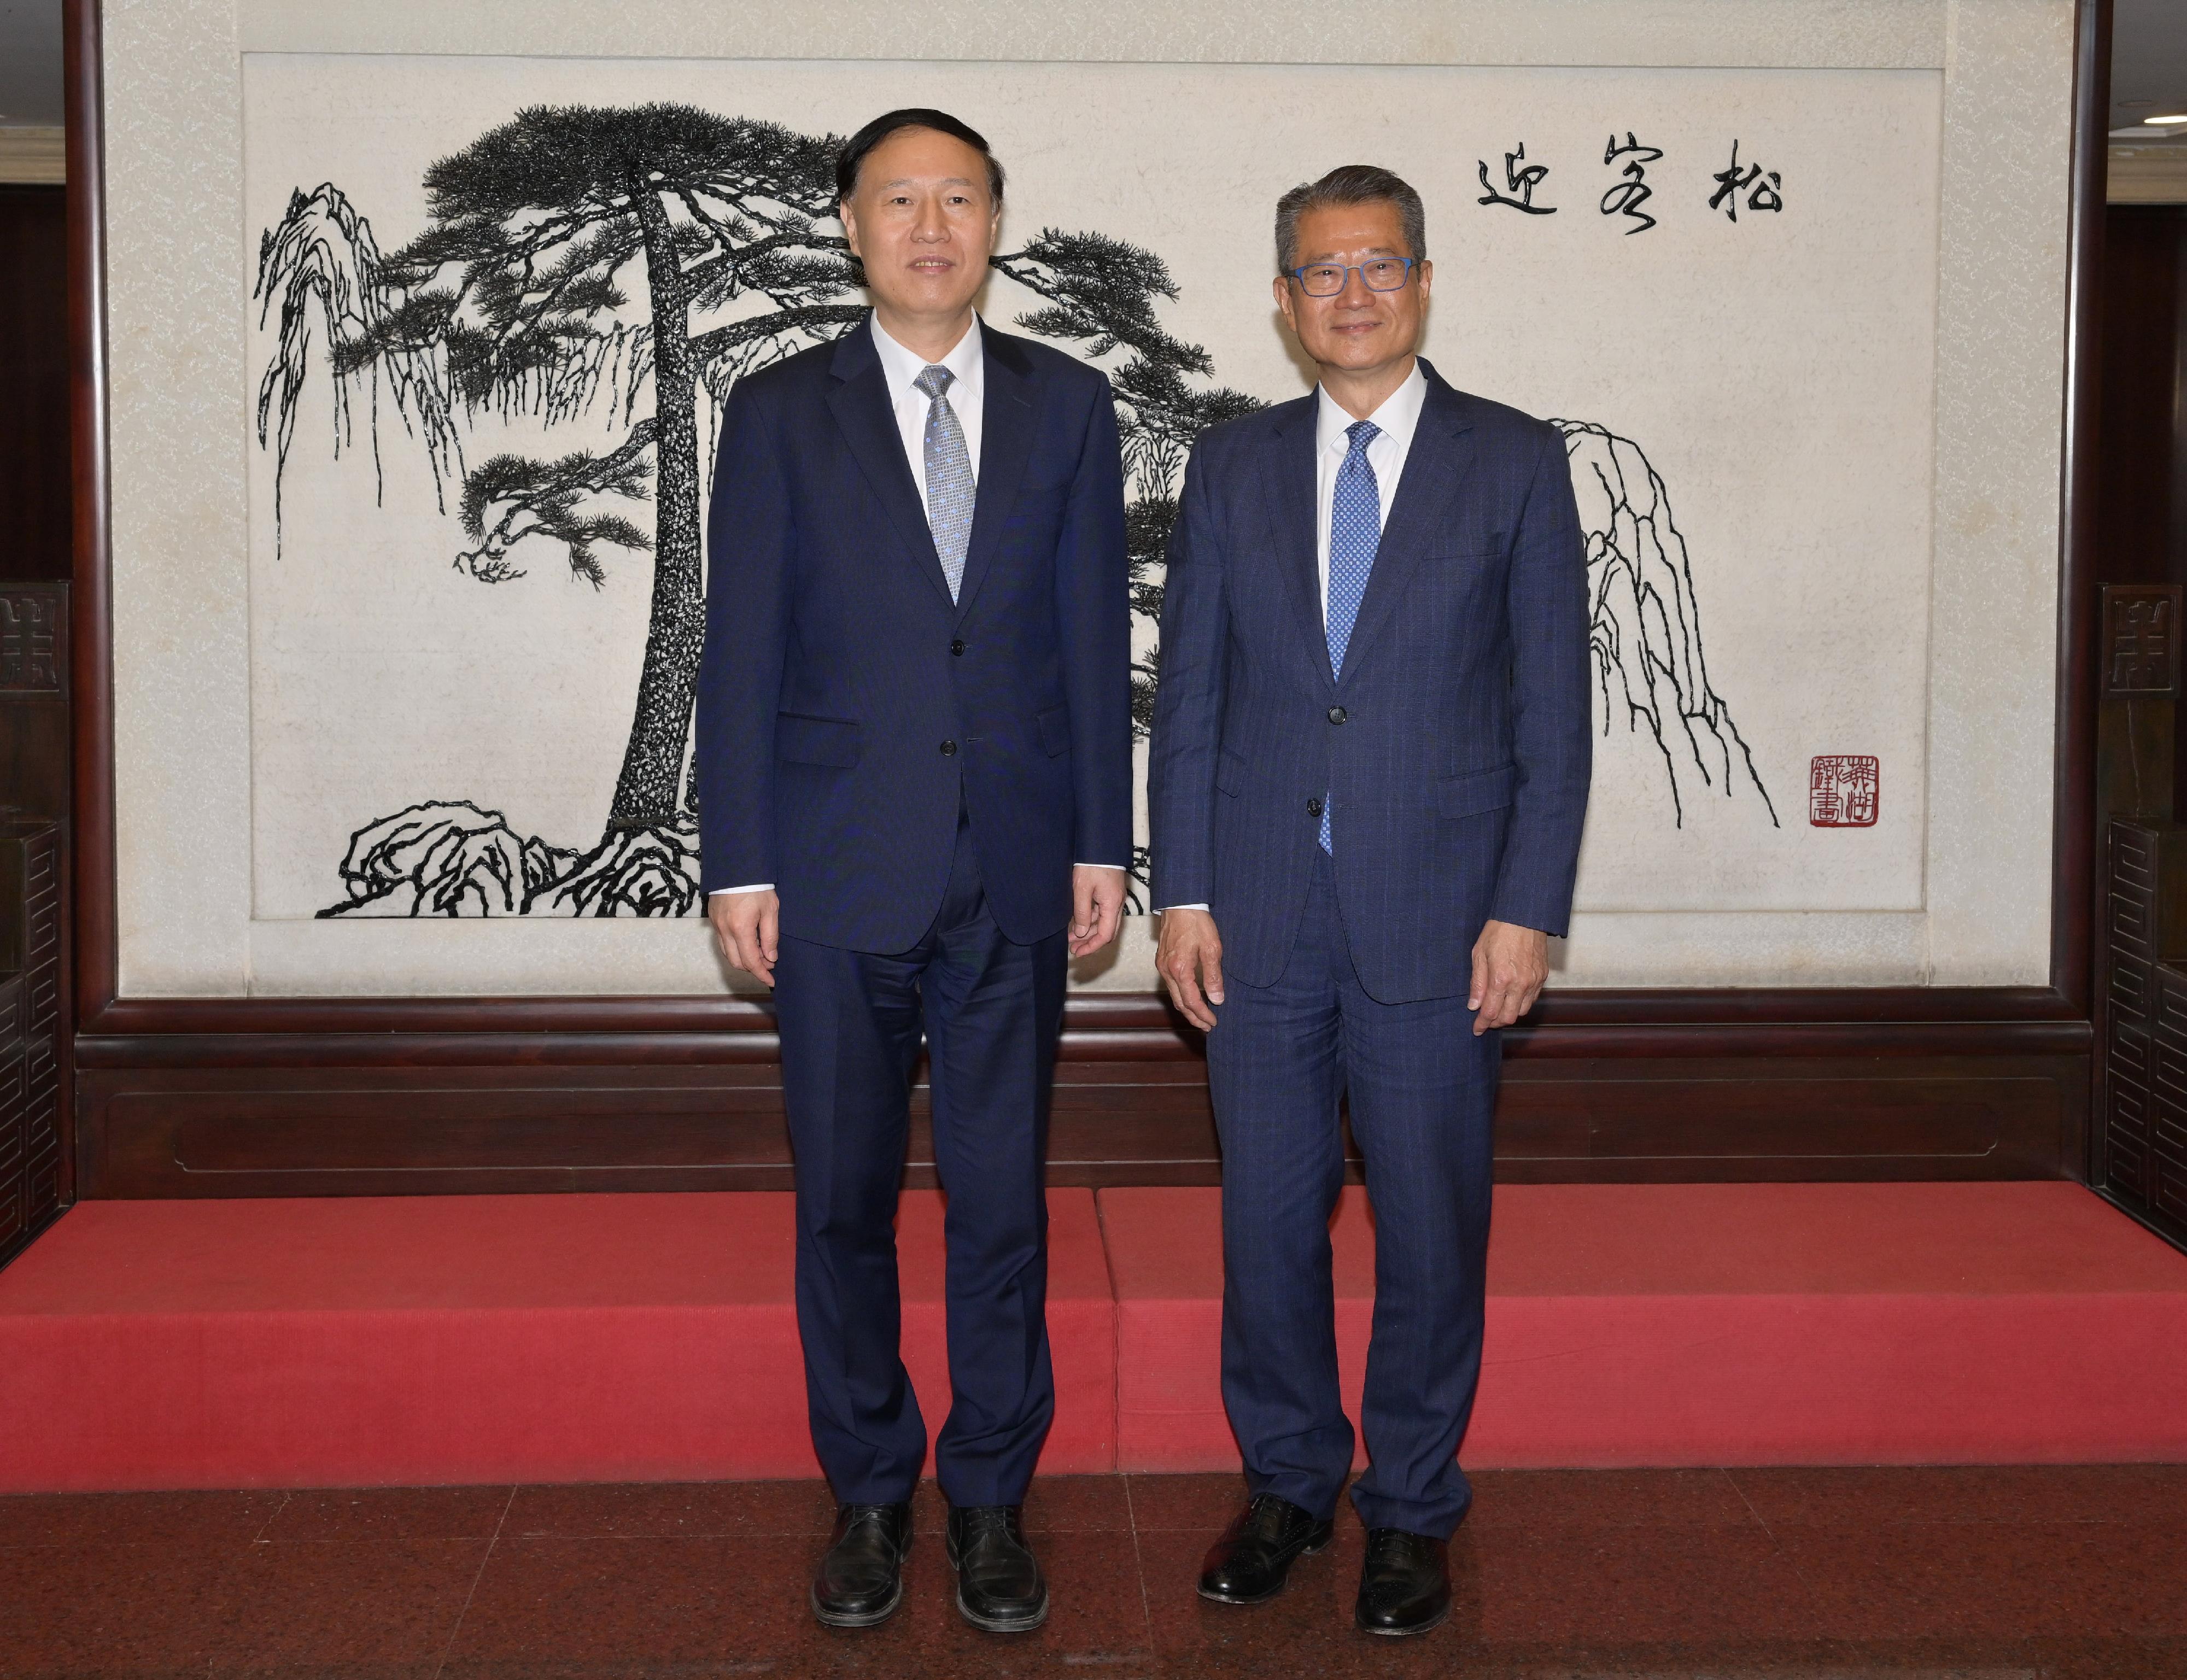 The Financial Secretary, Mr Paul Chan, started his visit in Beijing today (April 18). Photo shows Mr Chan (right) meeting with Vice Chairman of the State-owned Assets Supervision and Administration Commission of the State Council Mr Zhao Shitang (left).